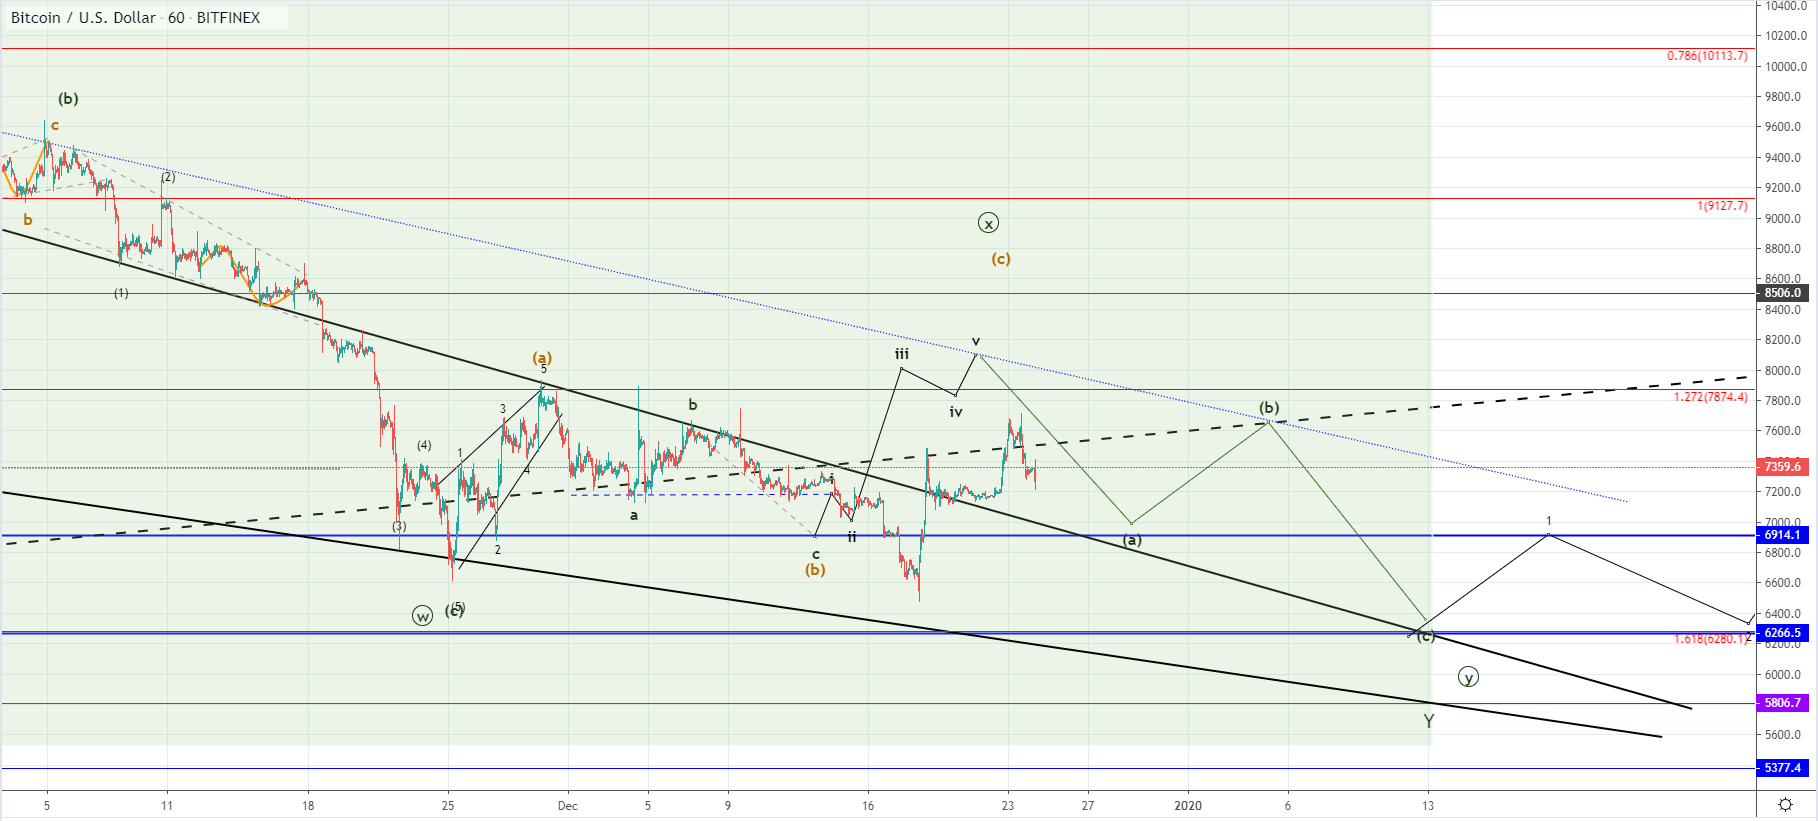 BTC and XRP - Increase could be corrective